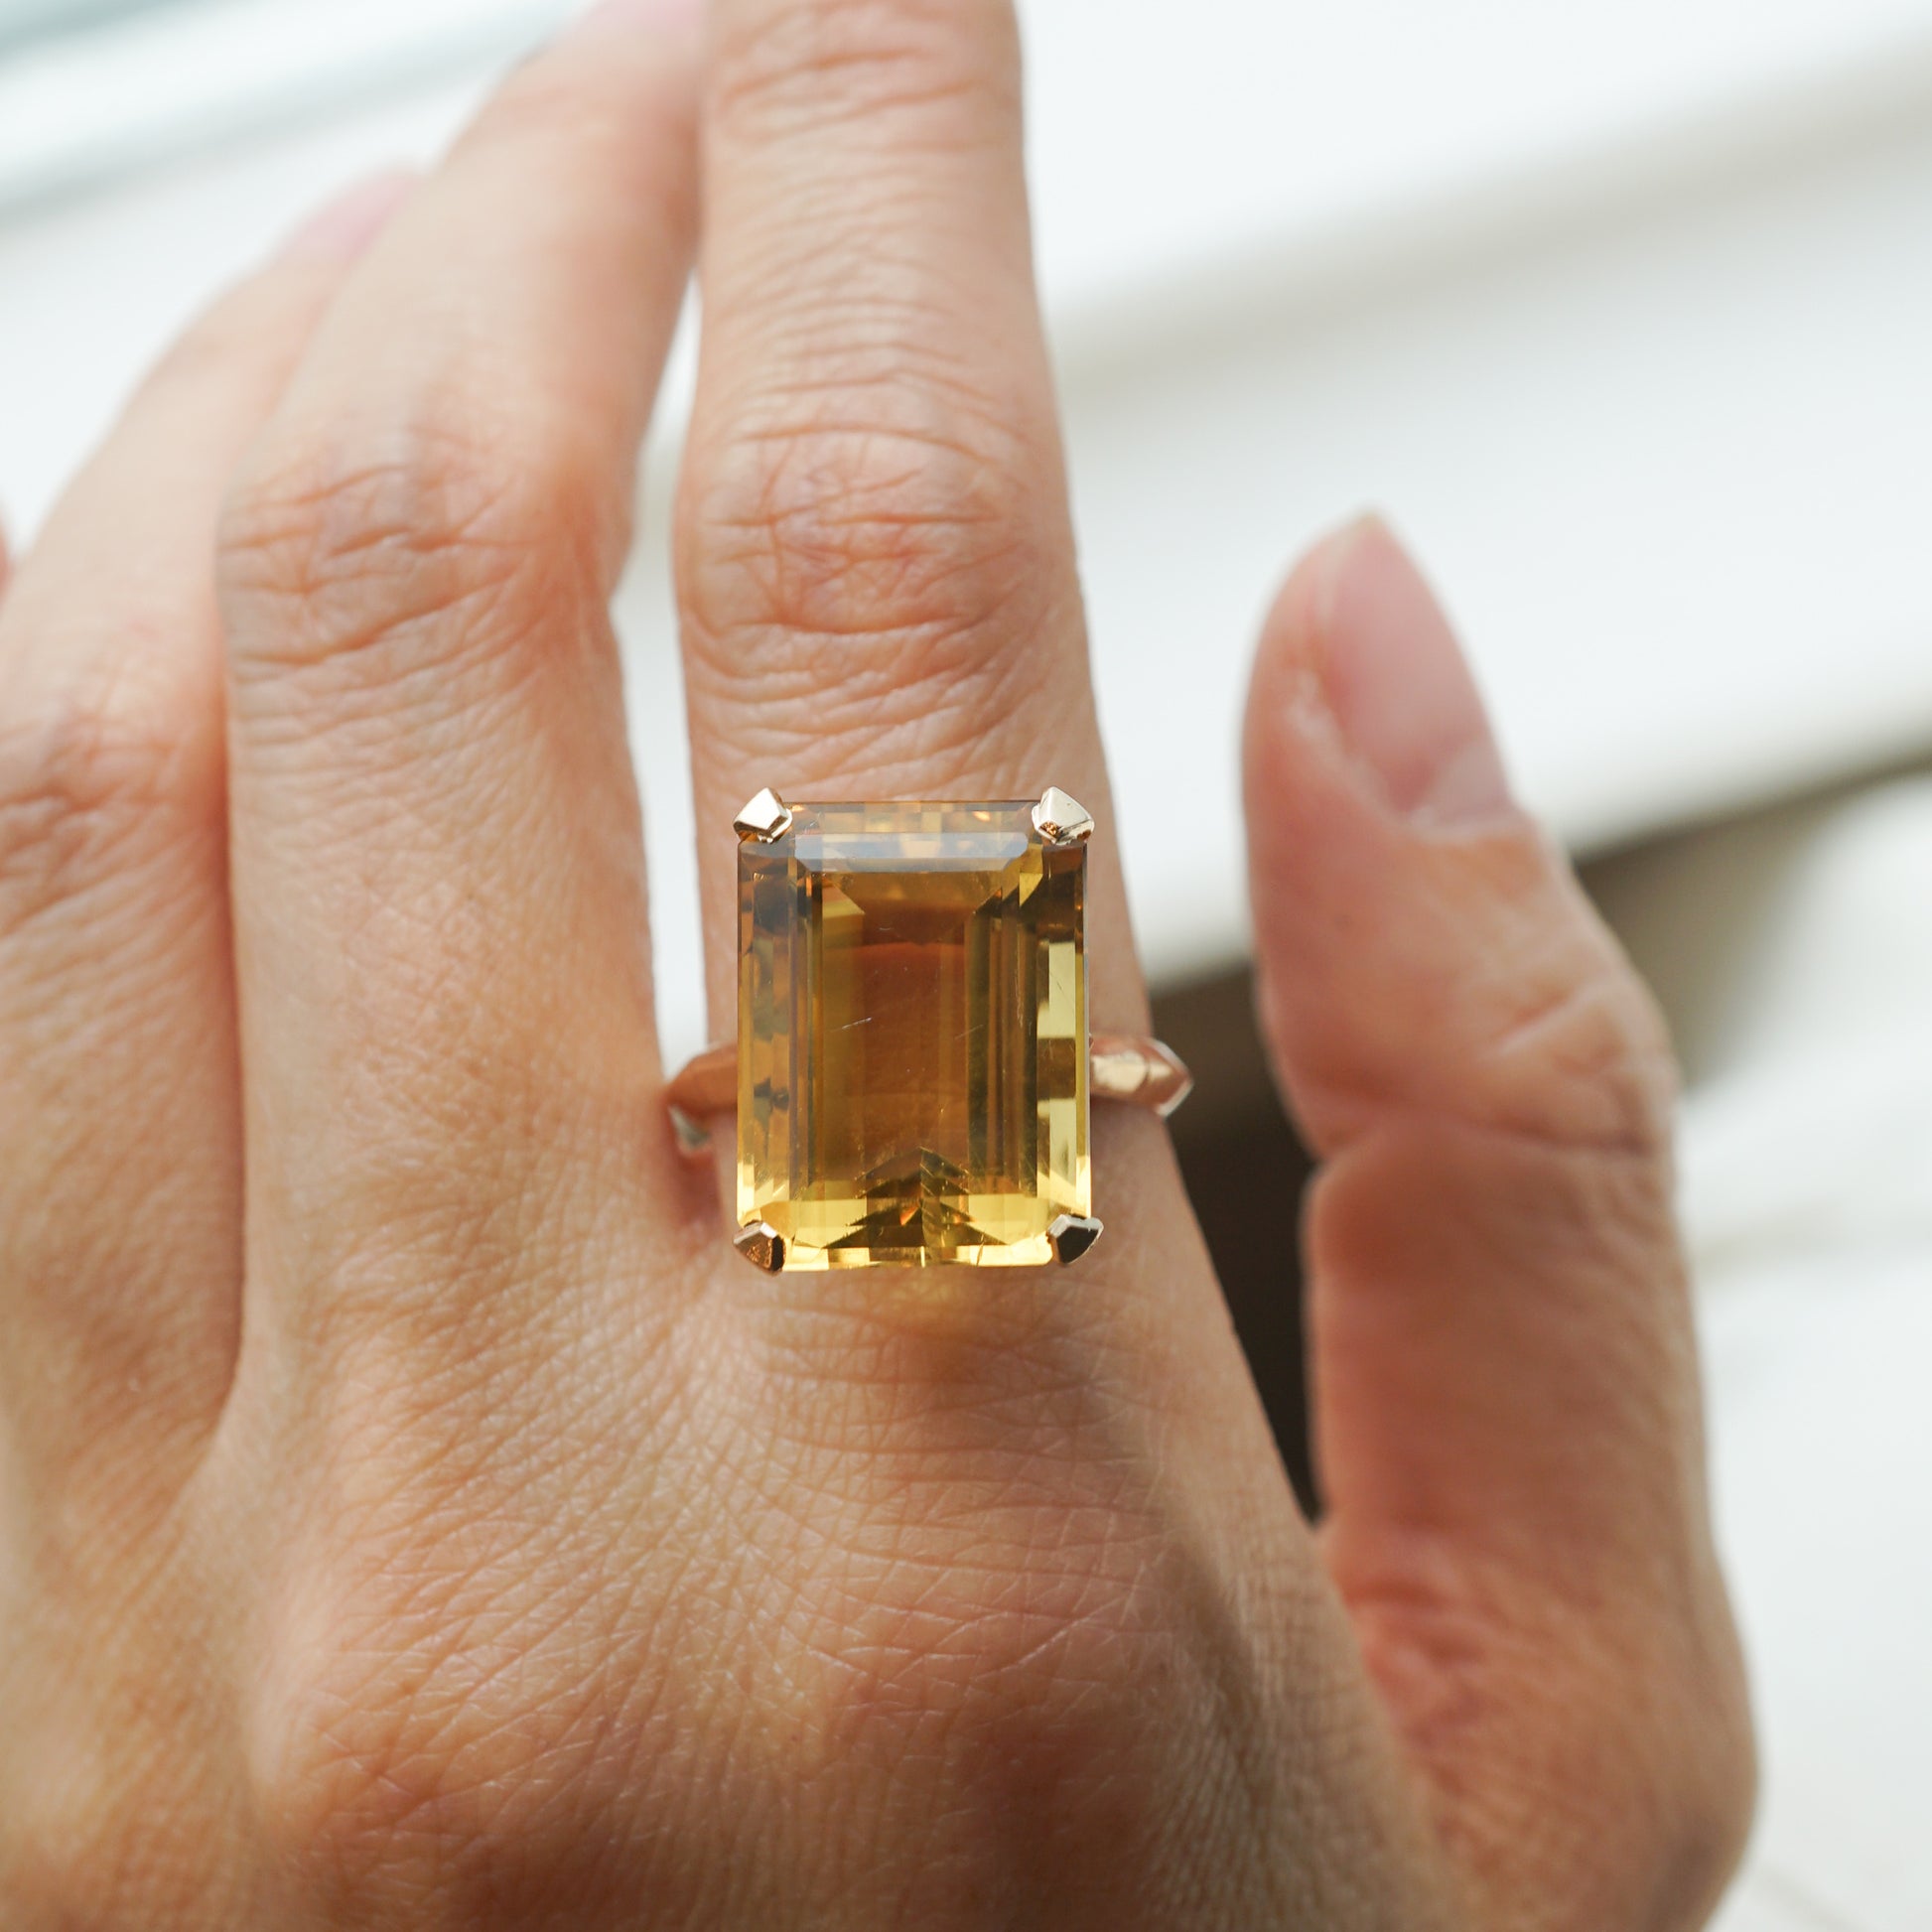 Emerald Cut Citrine Cocktail Ring in 14k Yellow GoldComposition: 14 Karat Yellow Gold Ring Size: 7.75 Total Gram Weight: 6.57 g